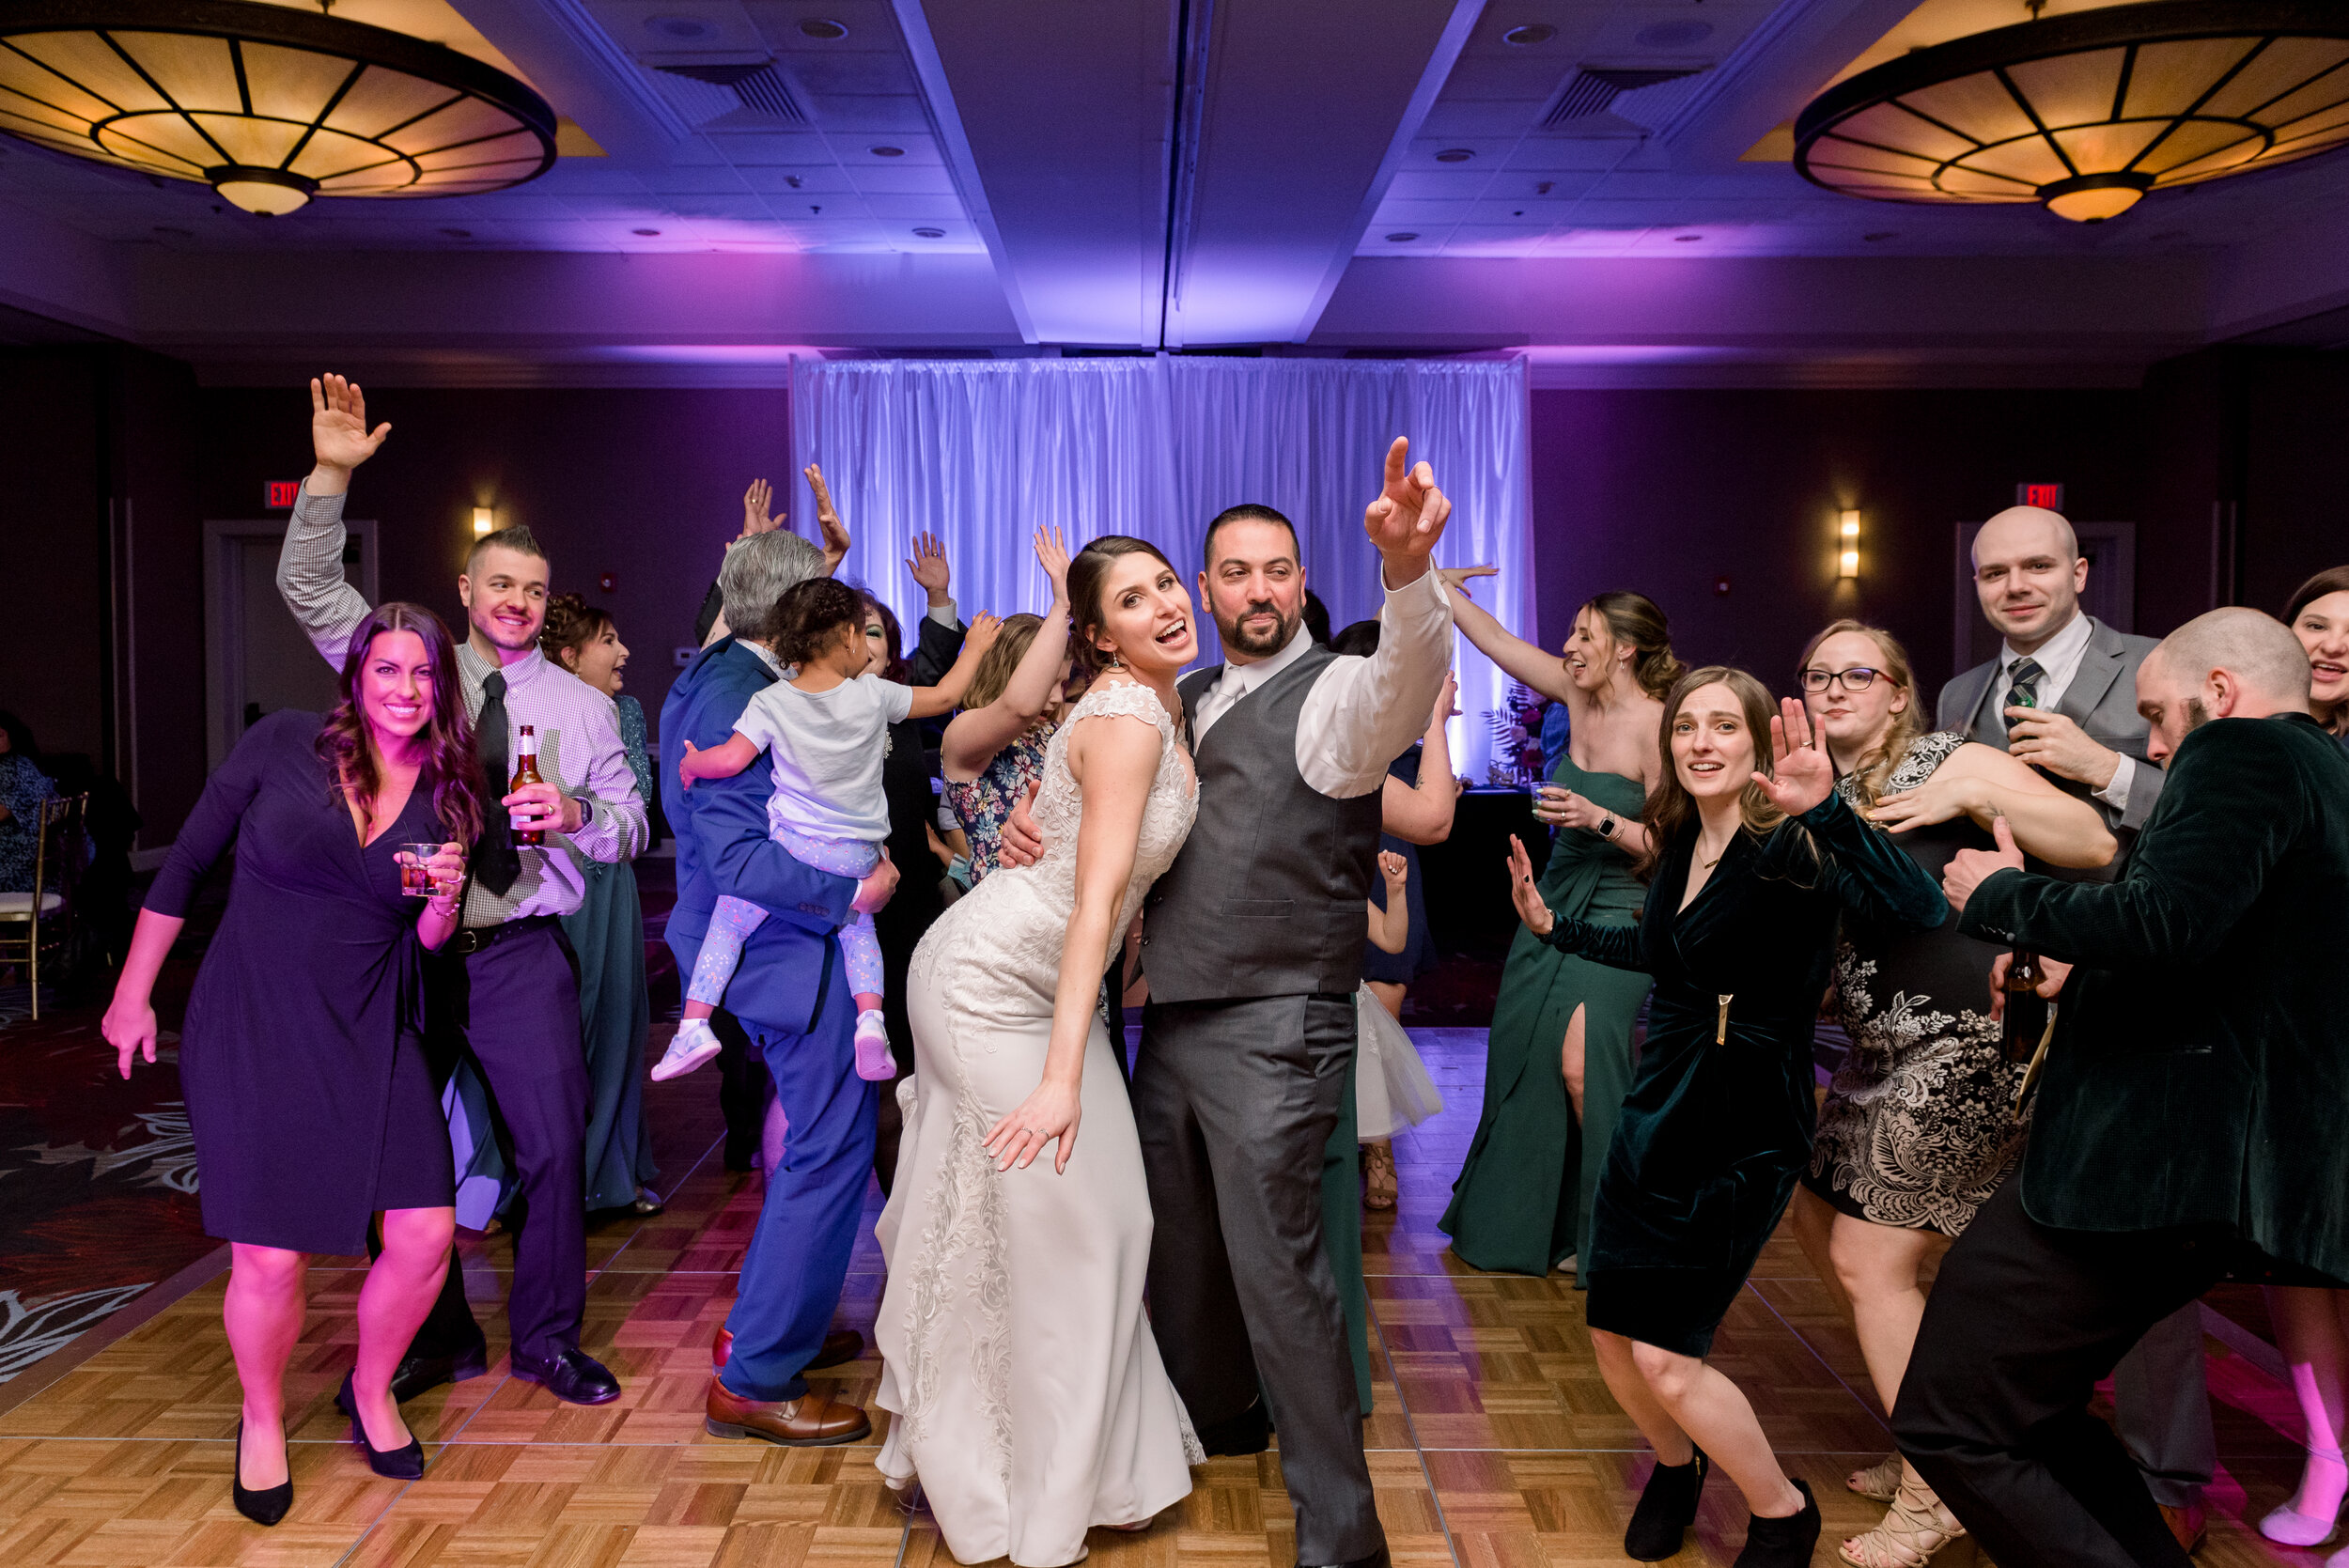 Weddings-at-The-DoubleTree-by-Hilton-Hotel-Pittsburgh-Ashley-Reed-Photography-95.jpg